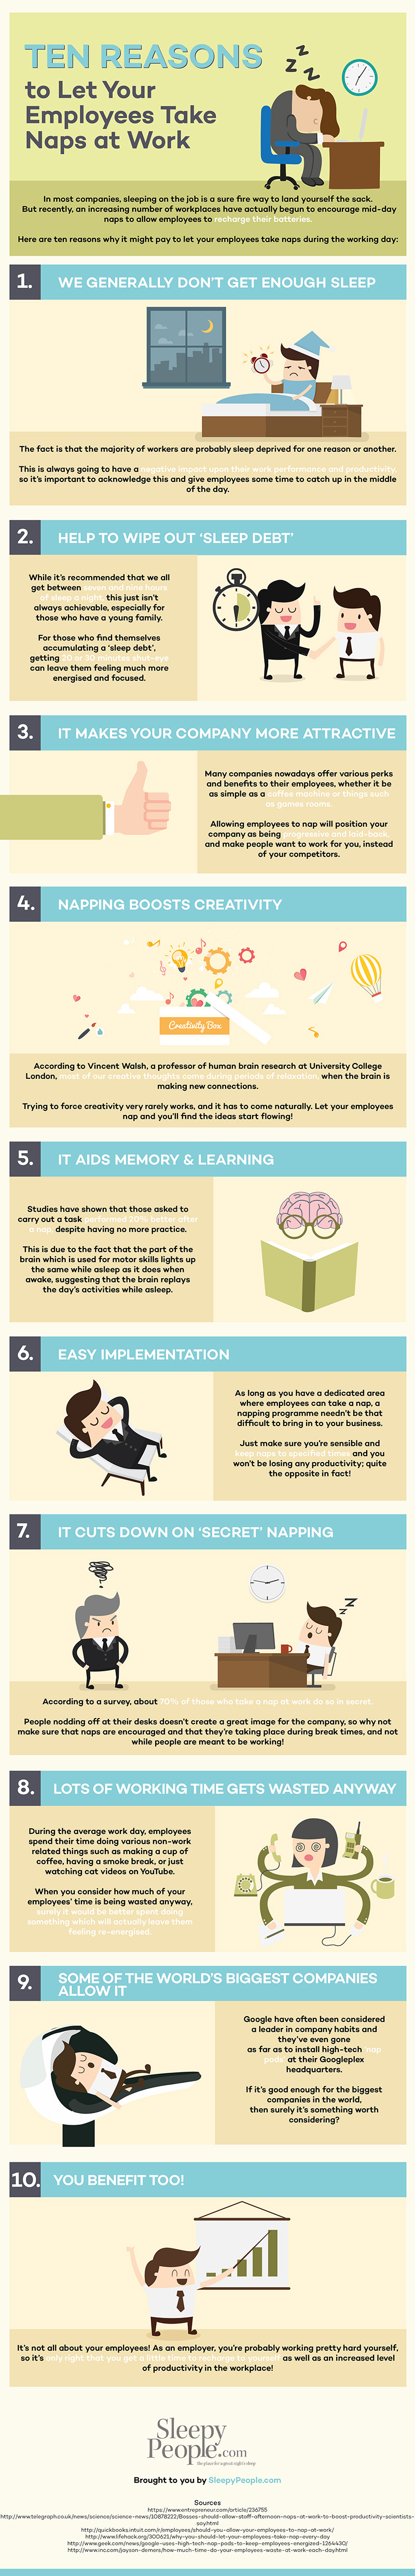 10 Reasons To Let Your Employees Take Naps At Work [Infographic]